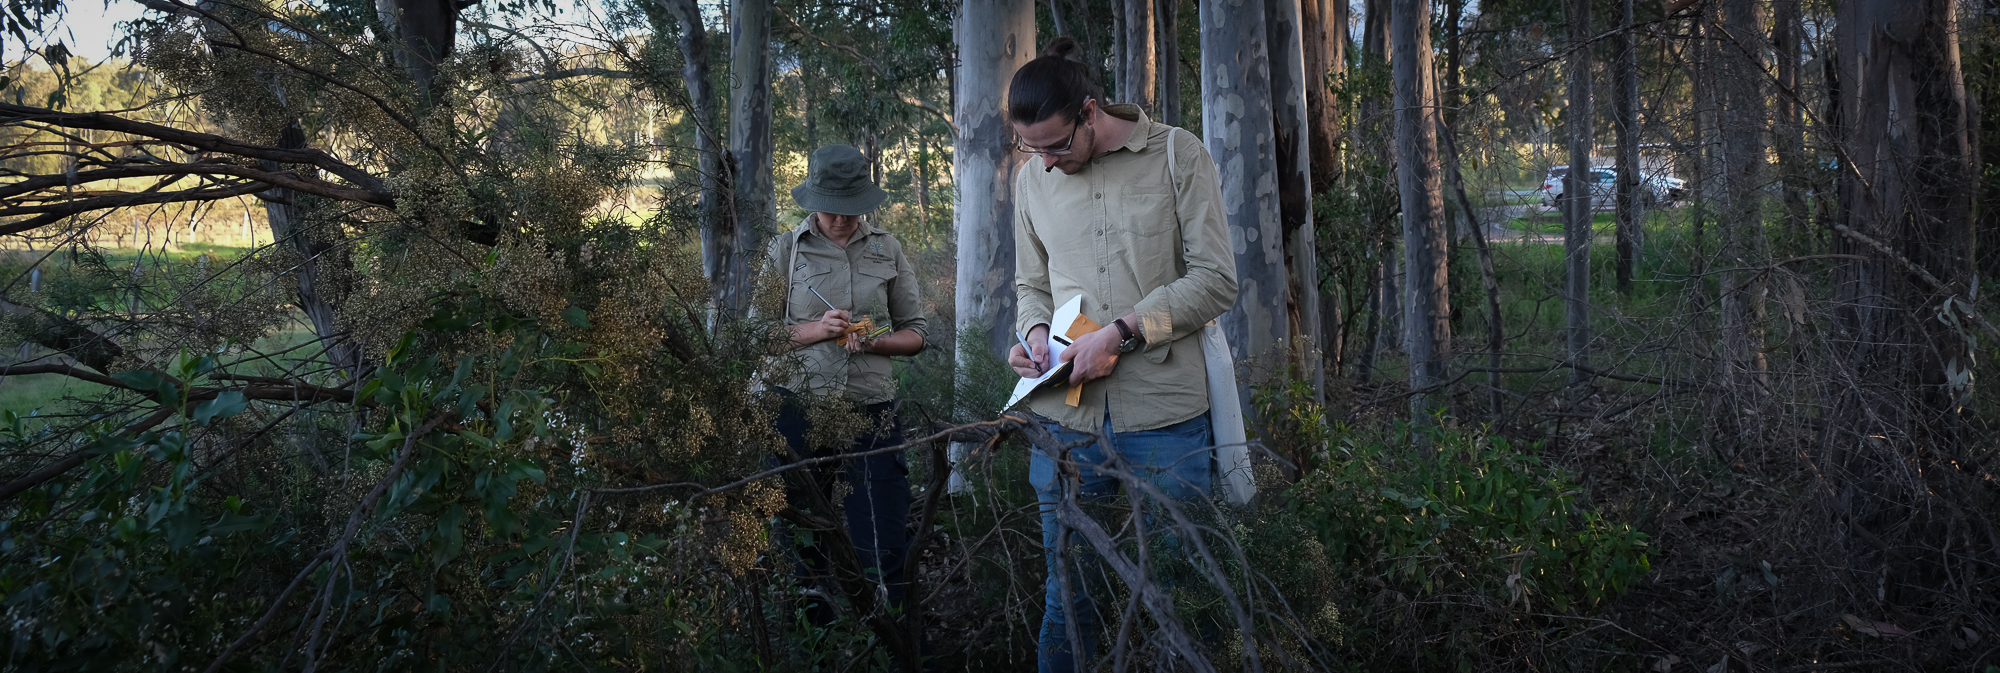 Two people in the field collecting leaf samples.